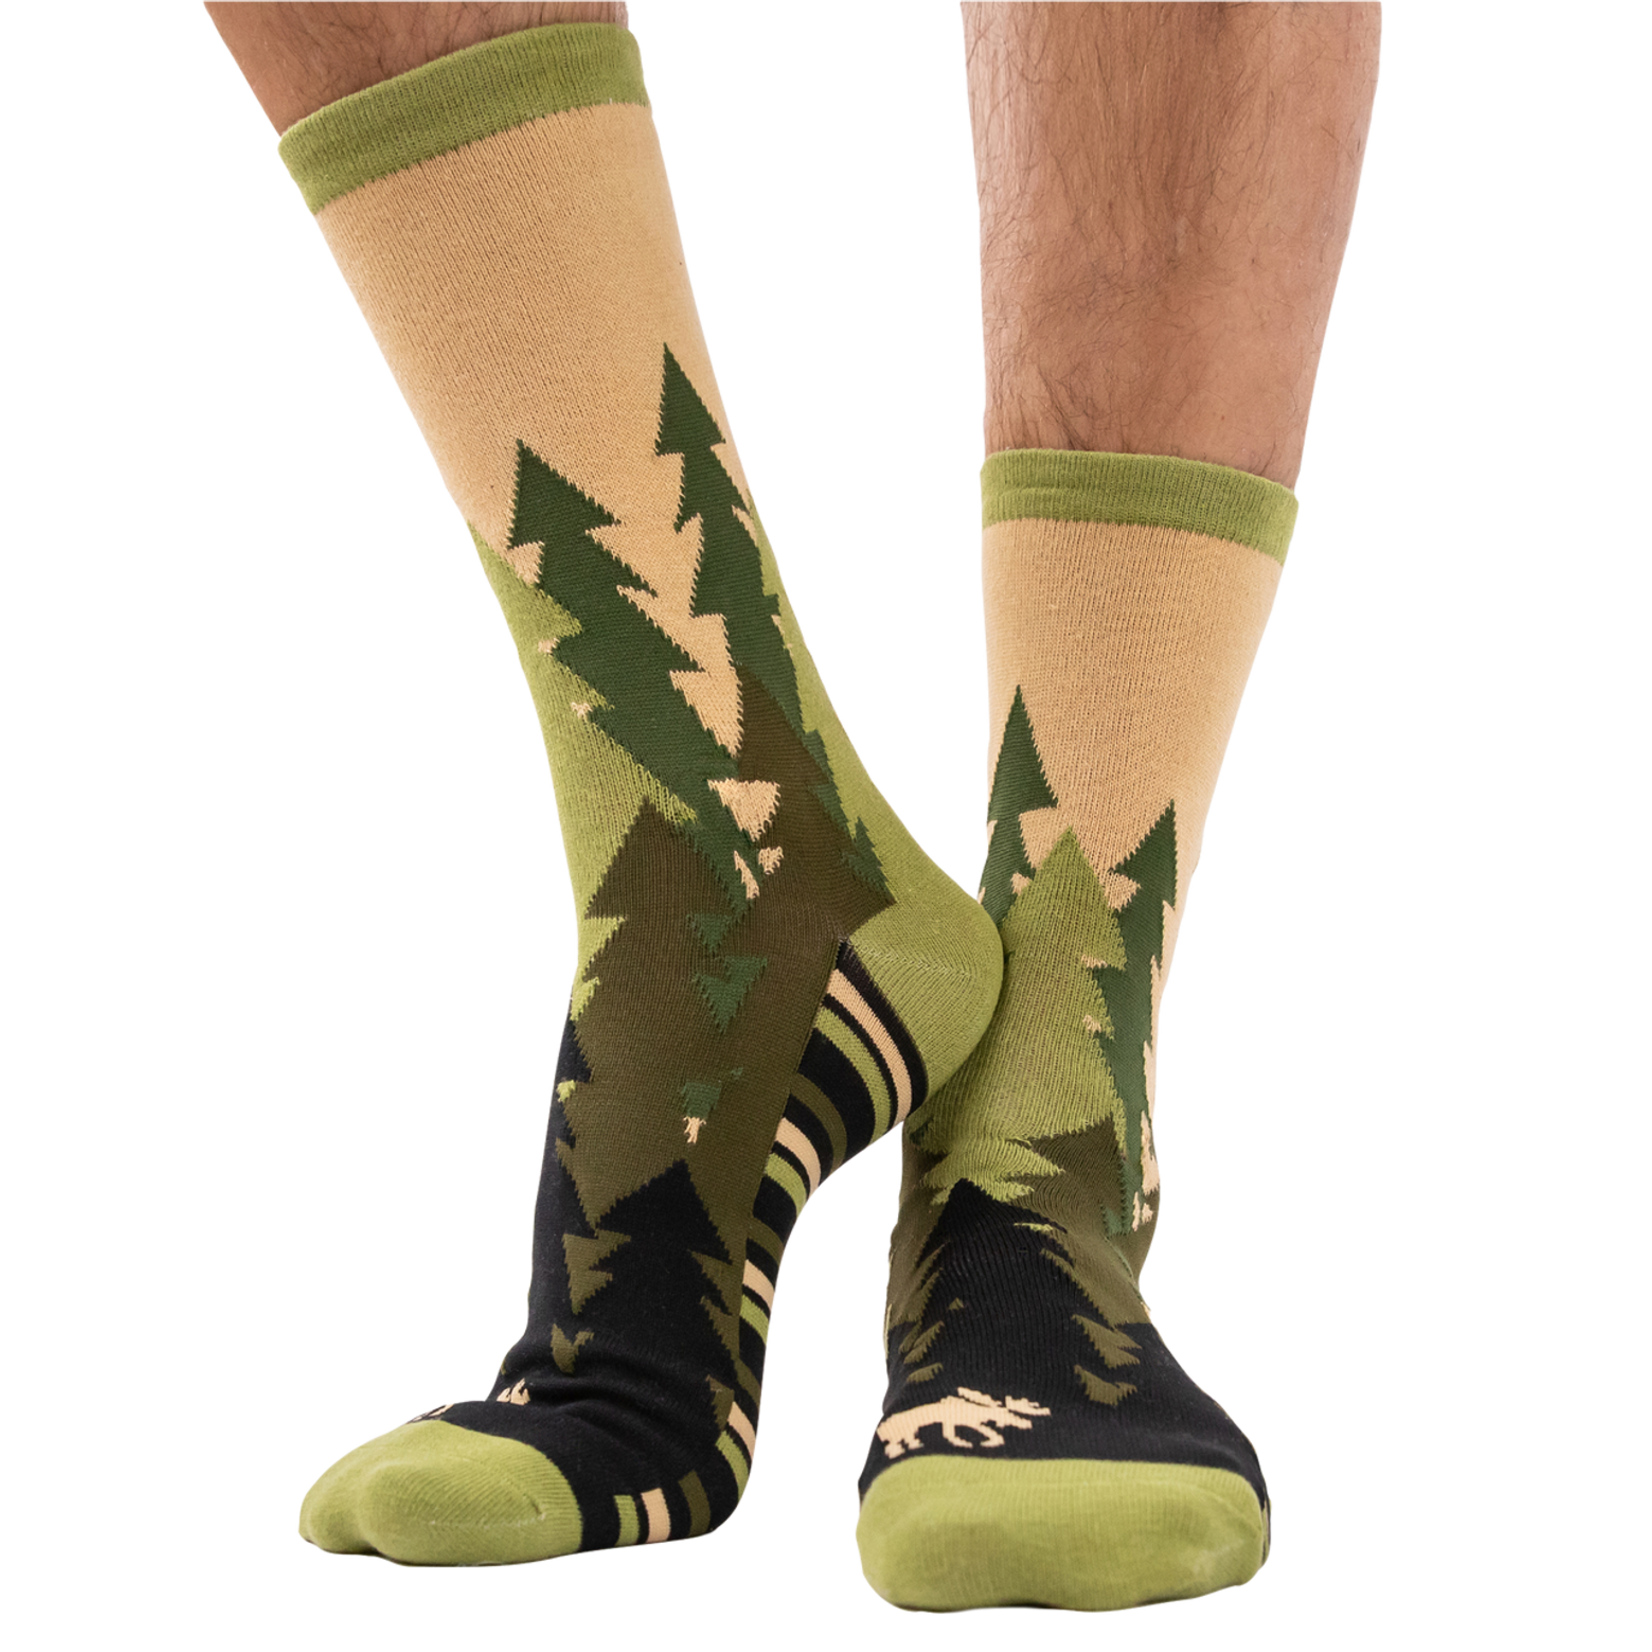 Lazy One Forest Crew Sock